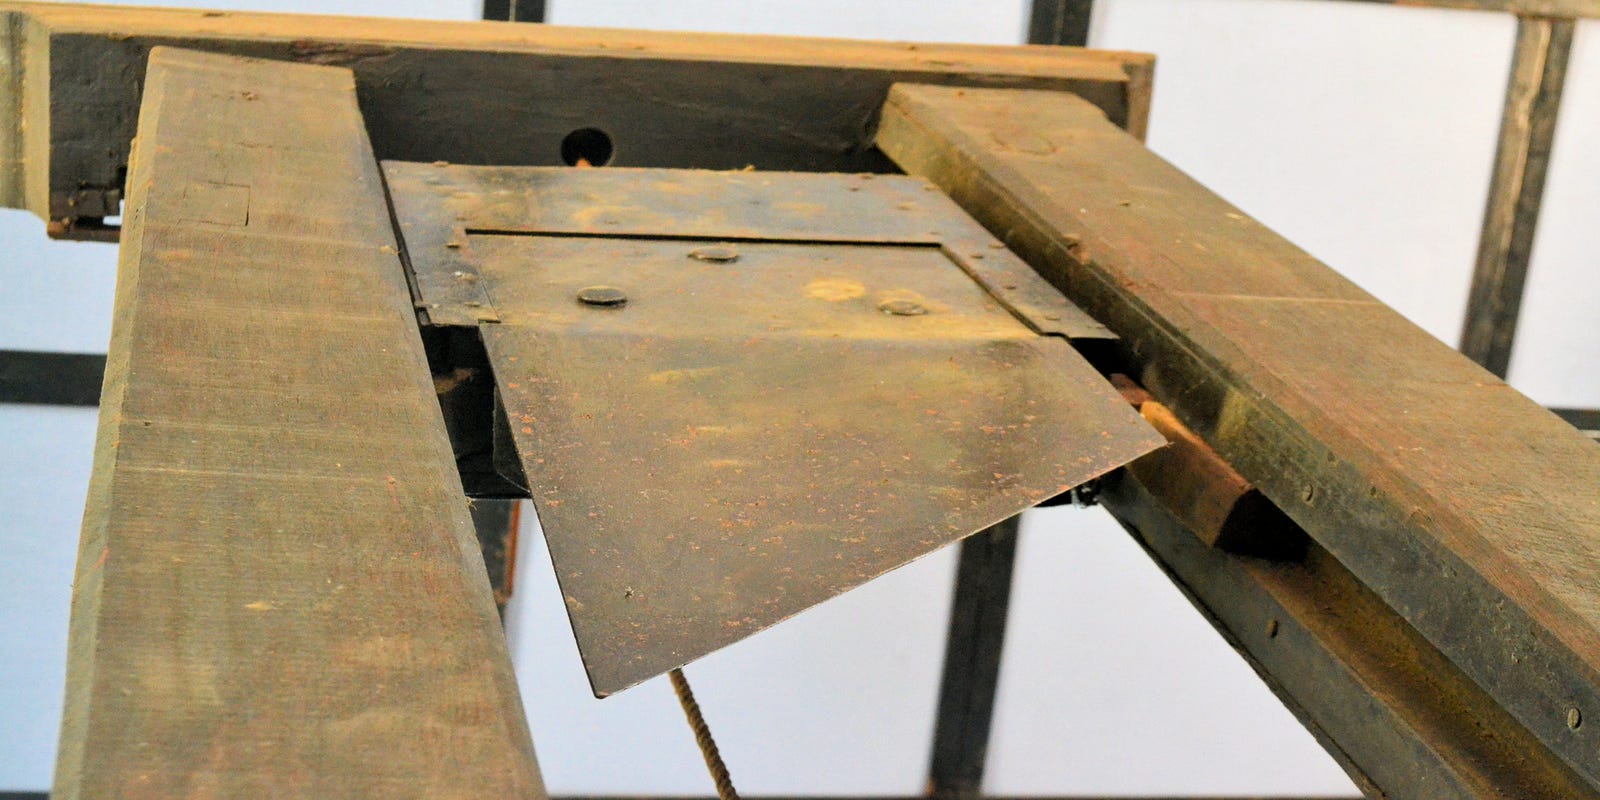 Fact check: Claim stating US bought 30,000 guillotines is fake